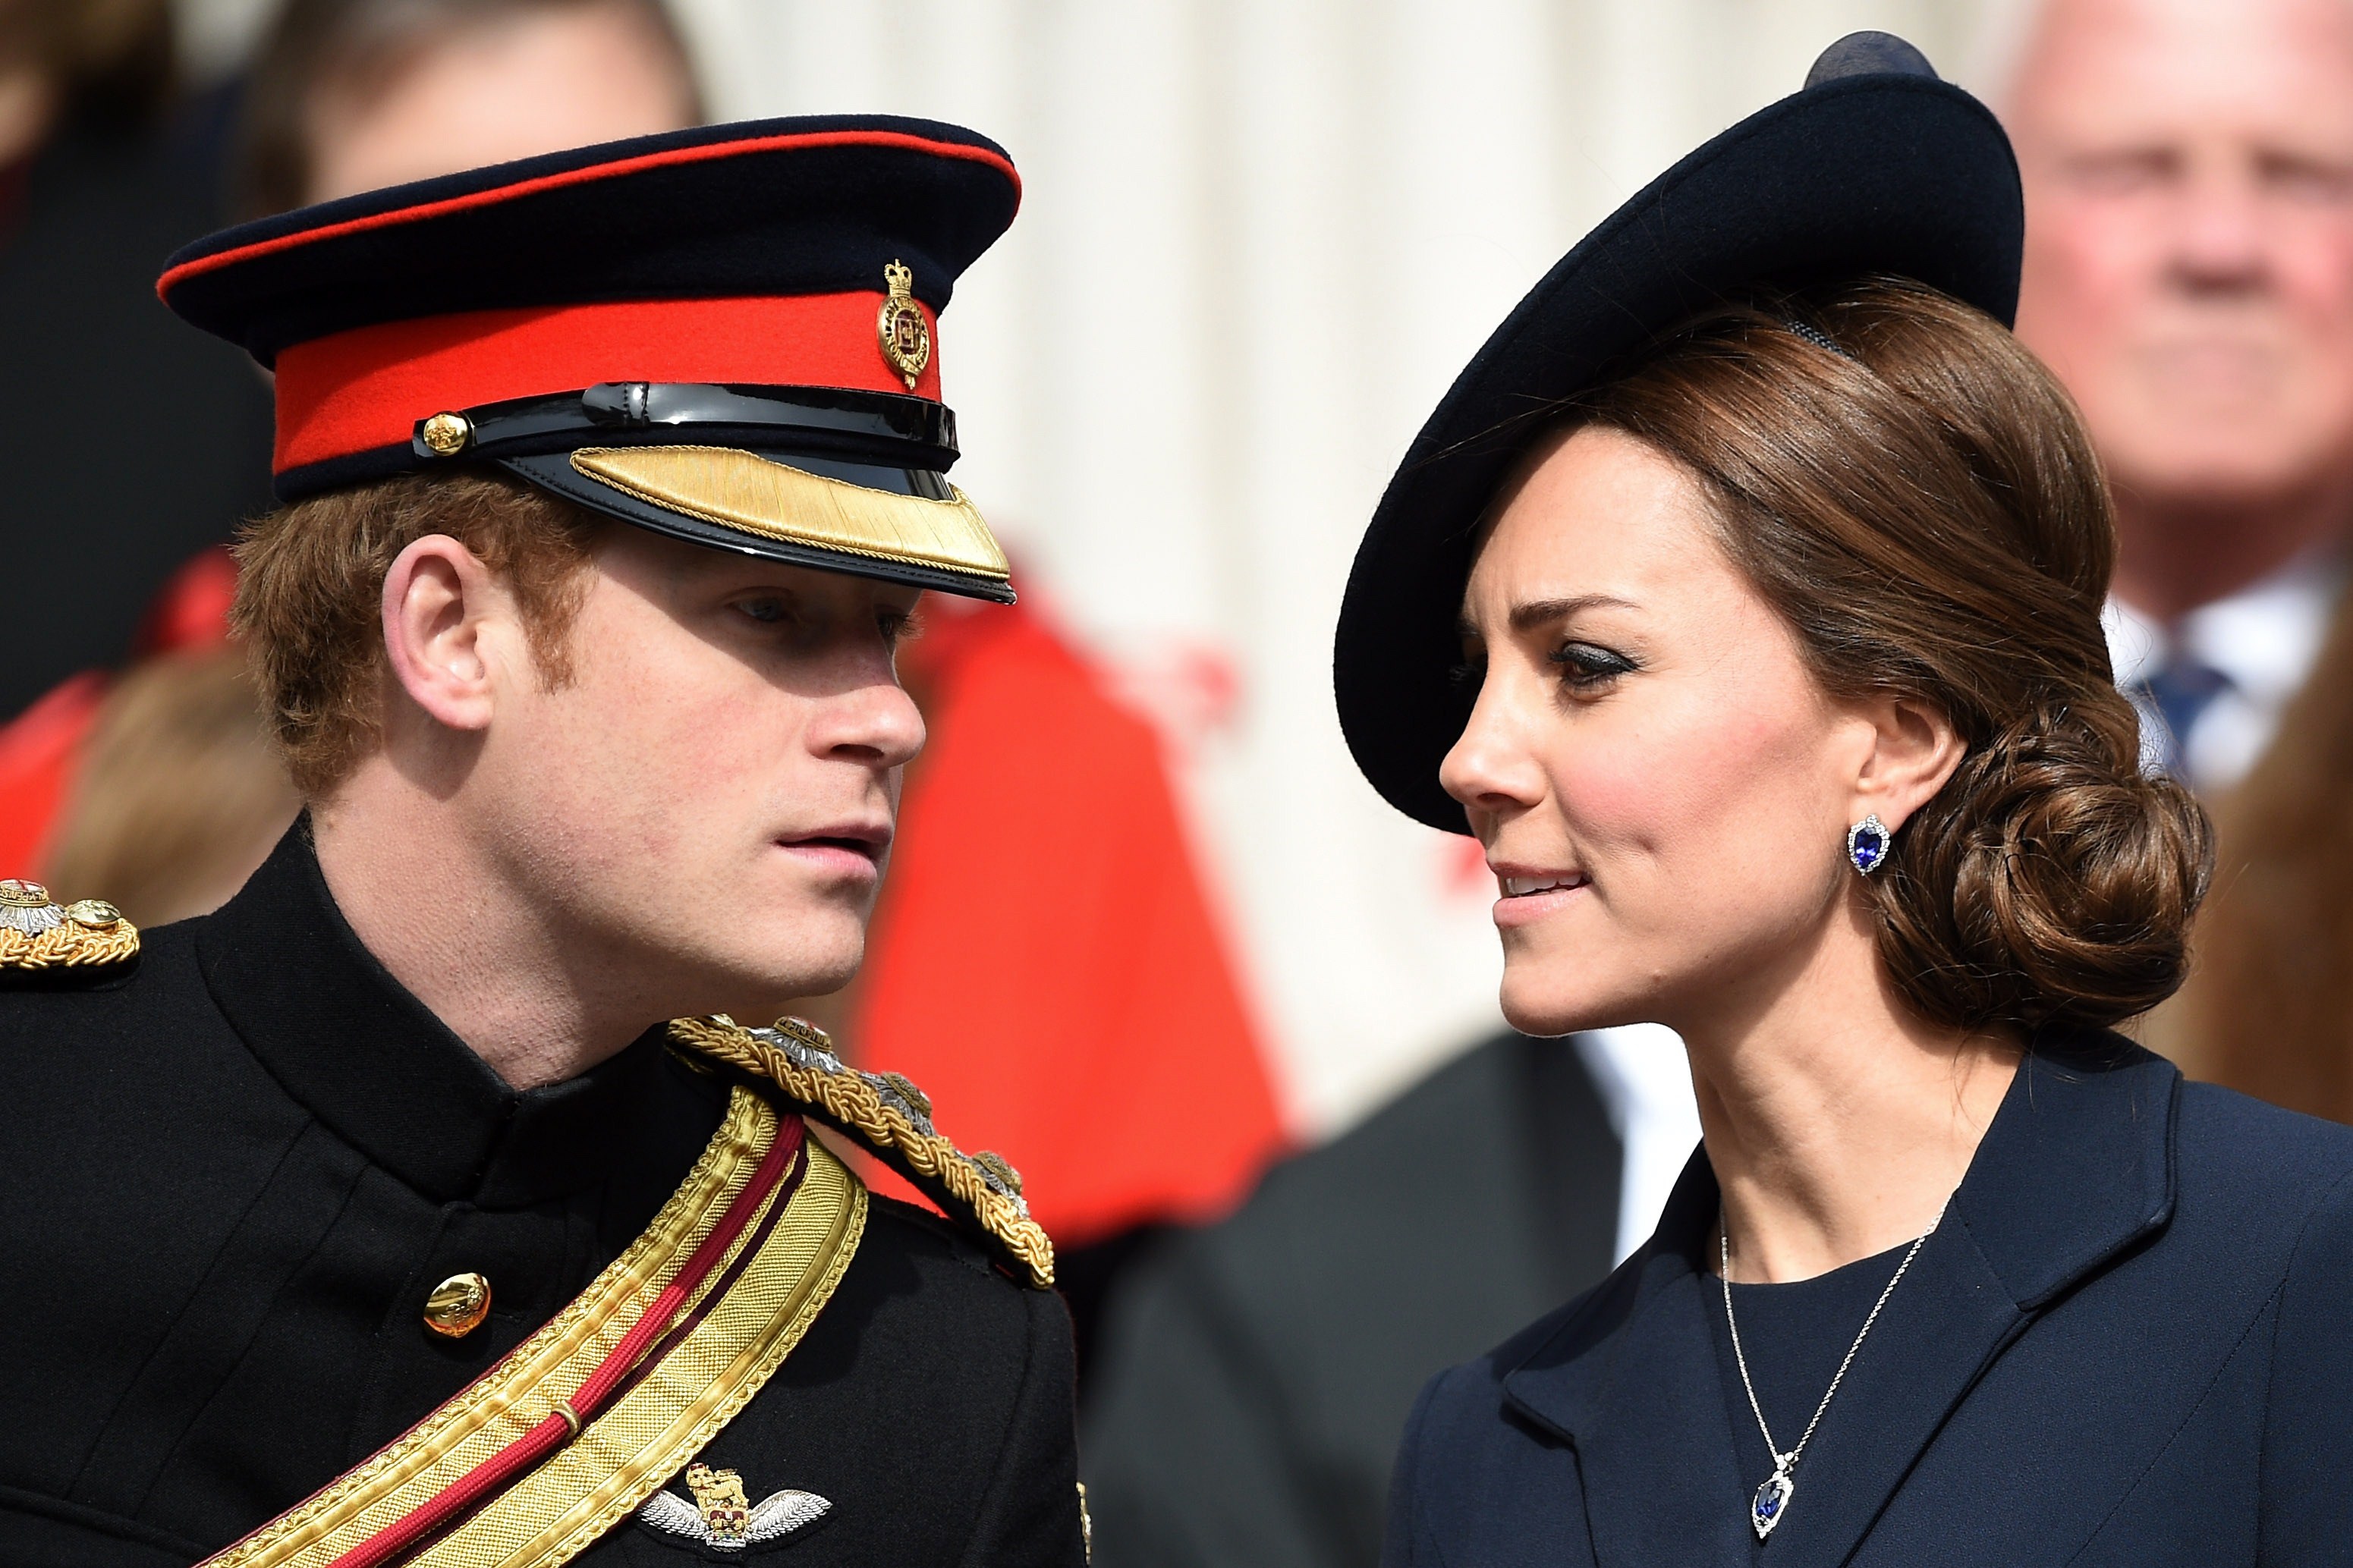 Prince Harry, in his ceremonial uniform, speaks with the Duchess of Cambridge at St. Paul's Cathedral earlier this month (Photo: Getty).